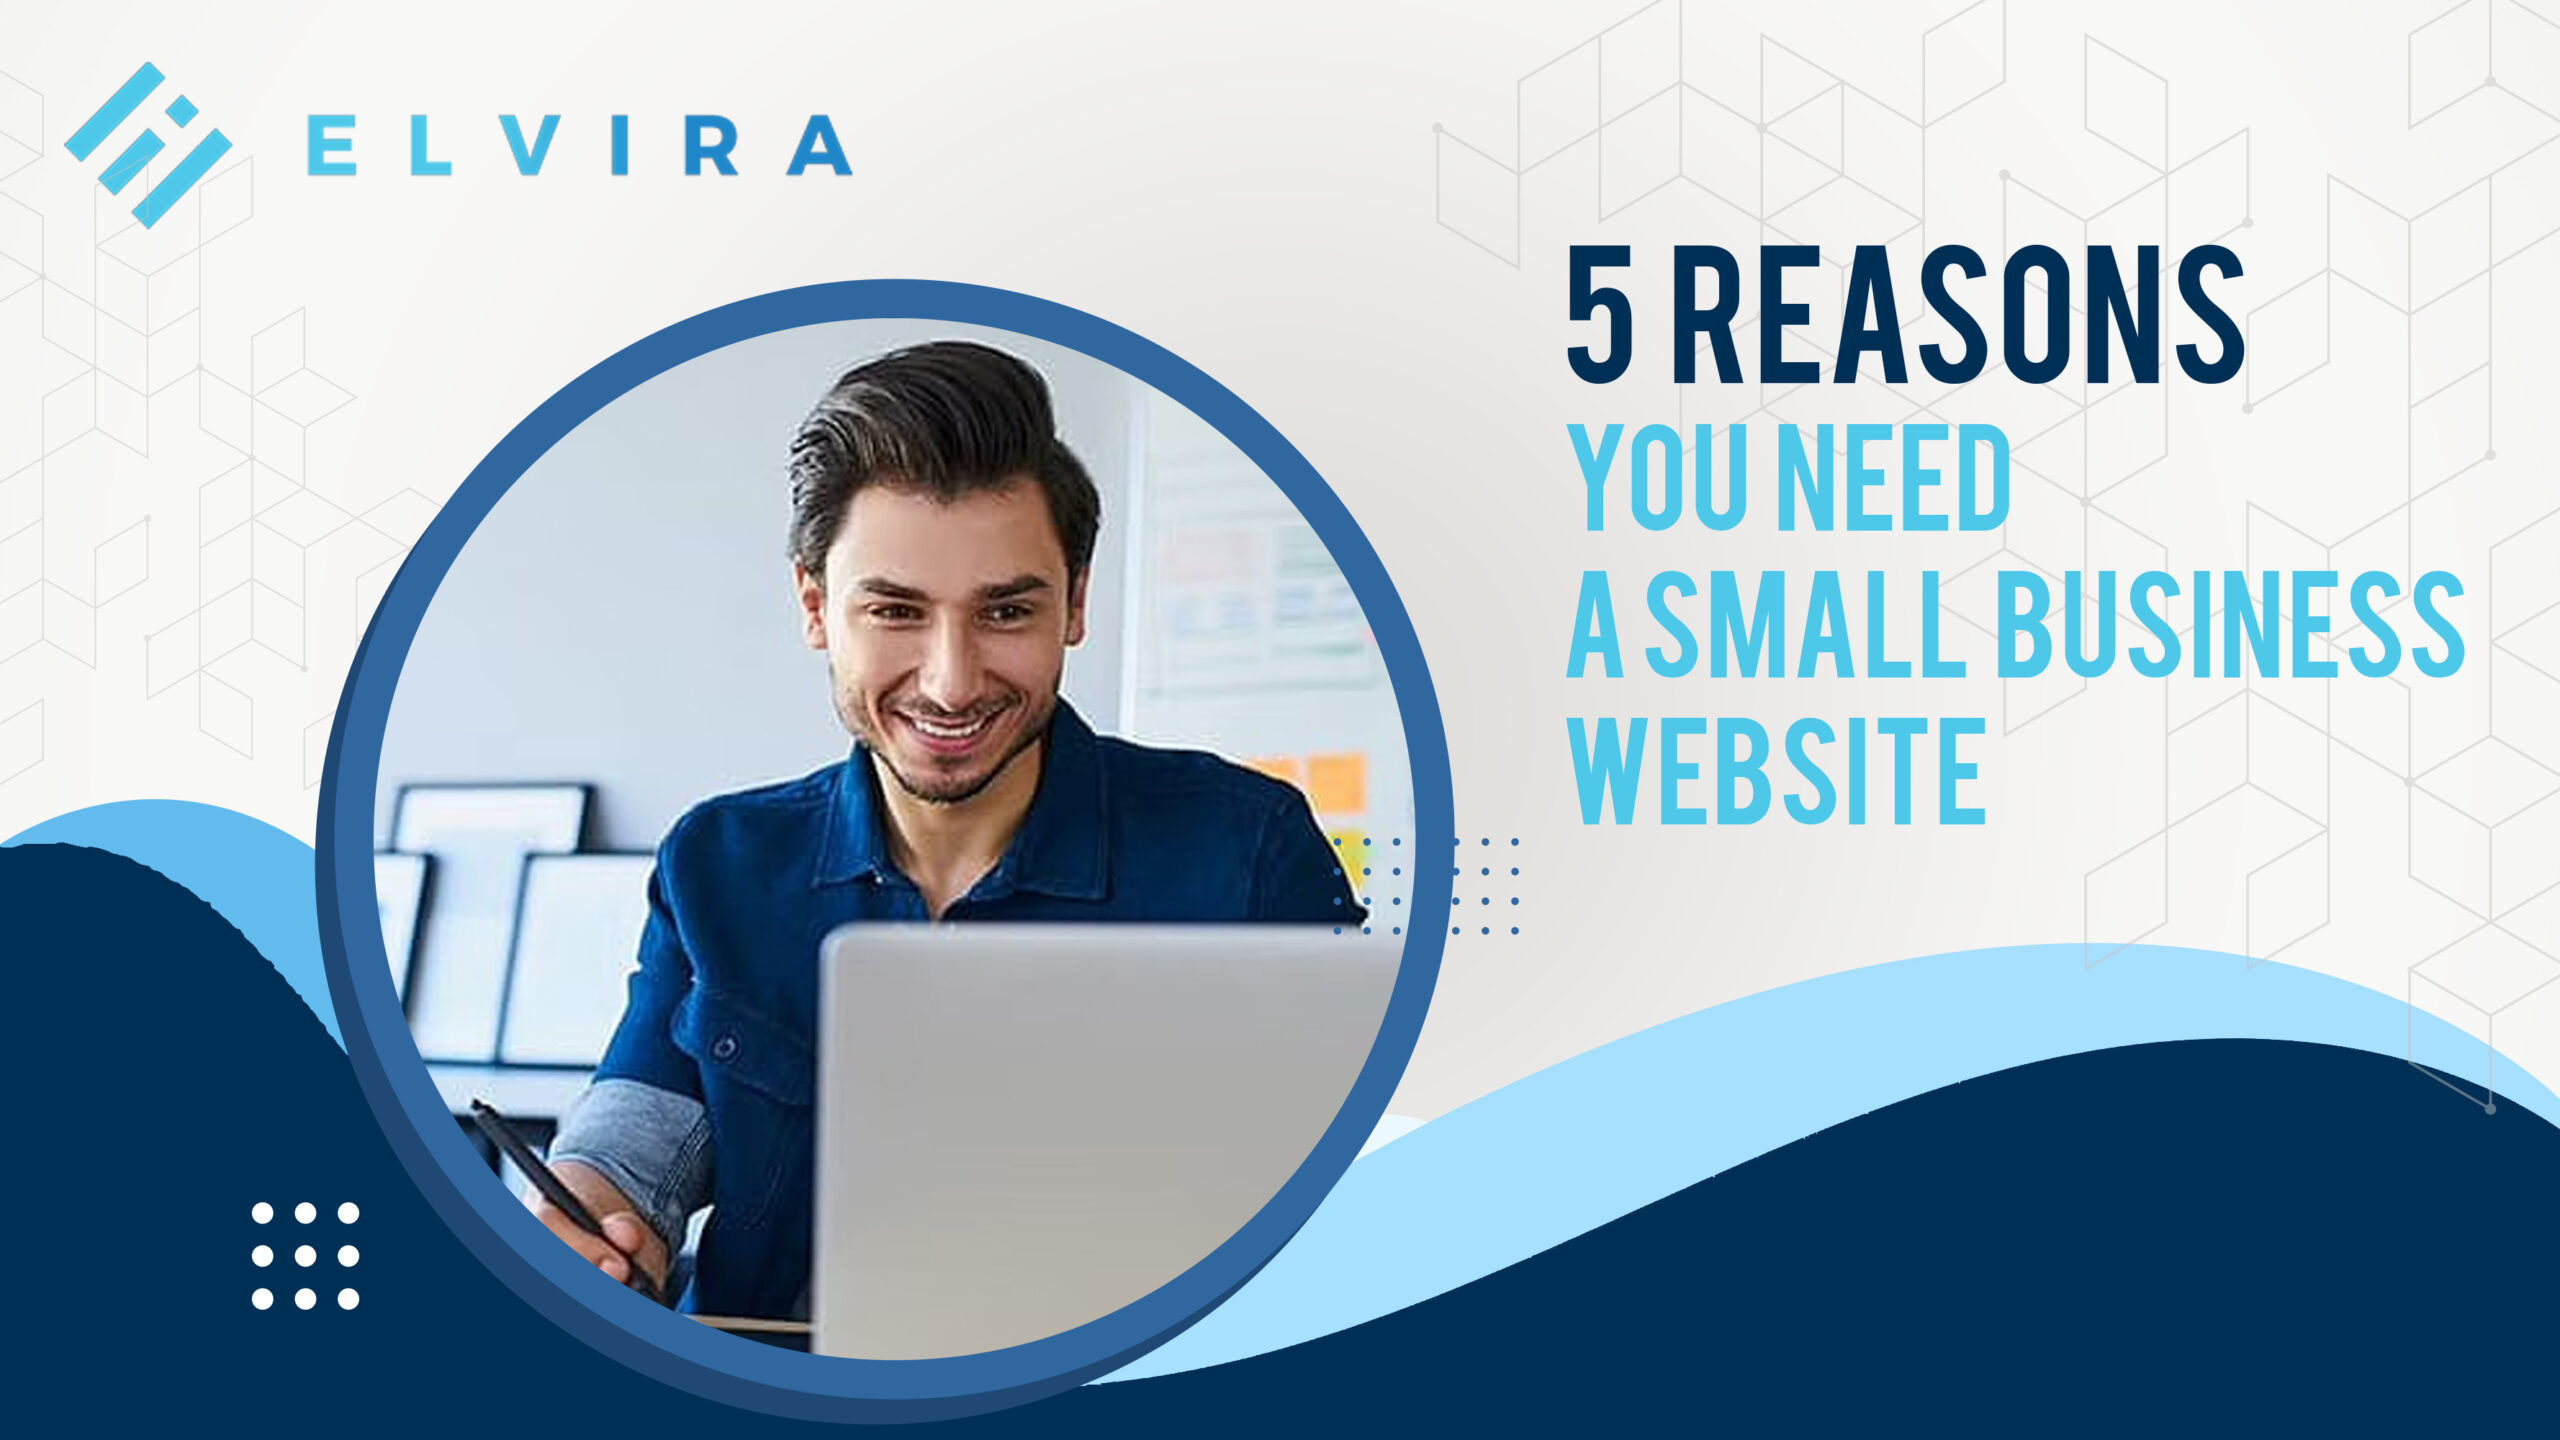 5 reasons you need a small business website